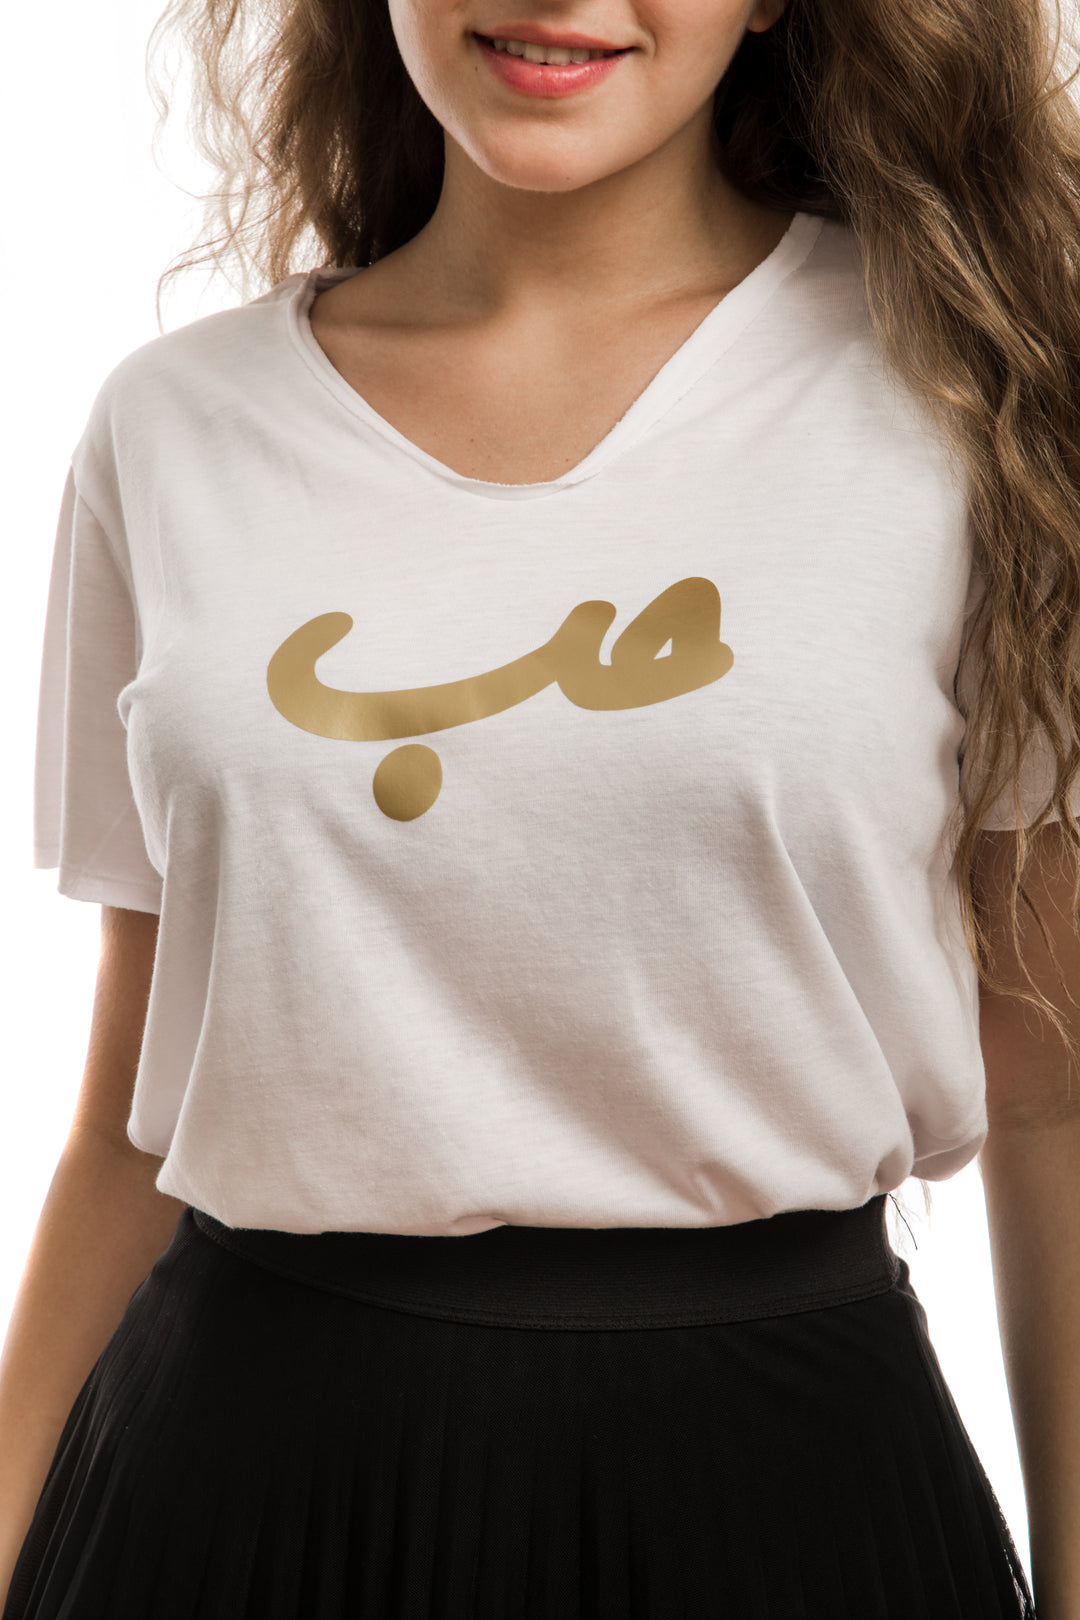 Young adult female wearing white T-shirt with Hobb written in Arabic حب and printed in gold silkscreen in the center of the T-shirt.